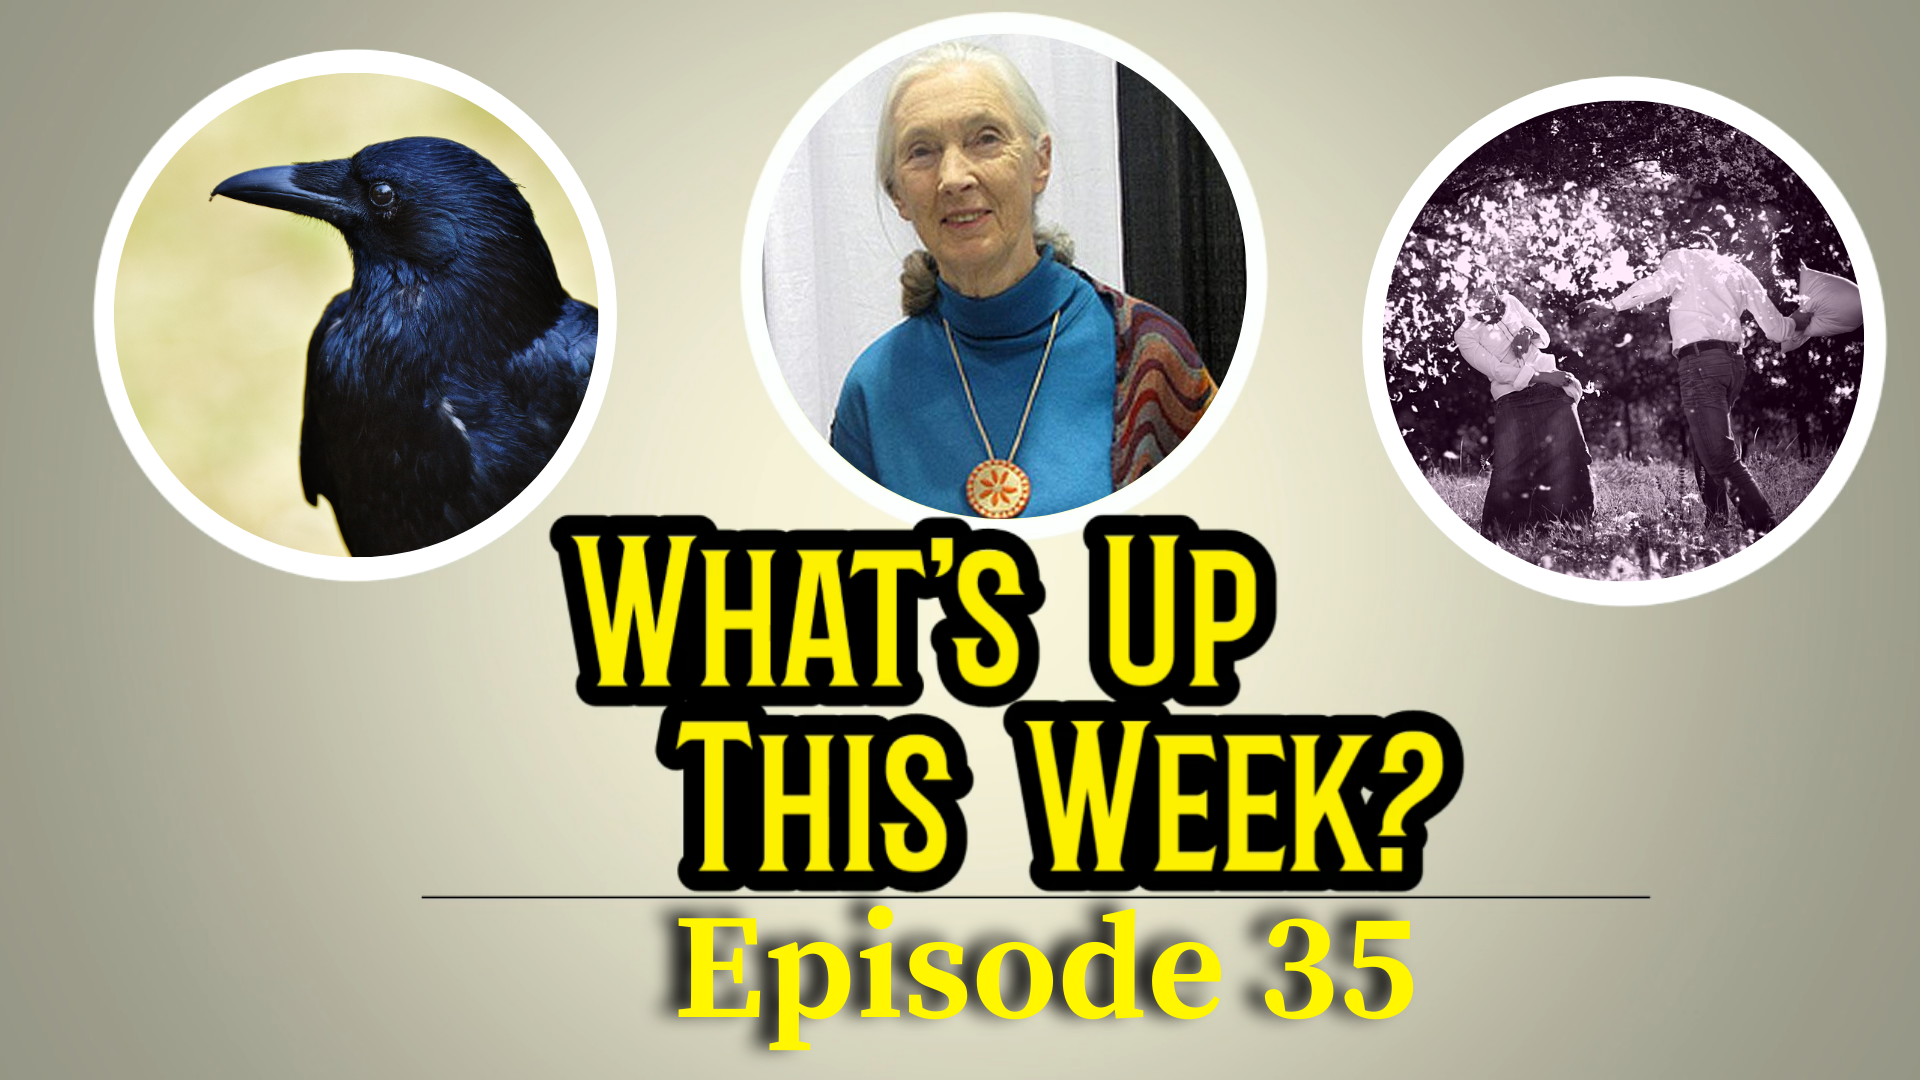 Text: What's Up This Week? Episode 29. 3 images in circles: a bird, Jane Goodall, and 2 people having a pillow fight